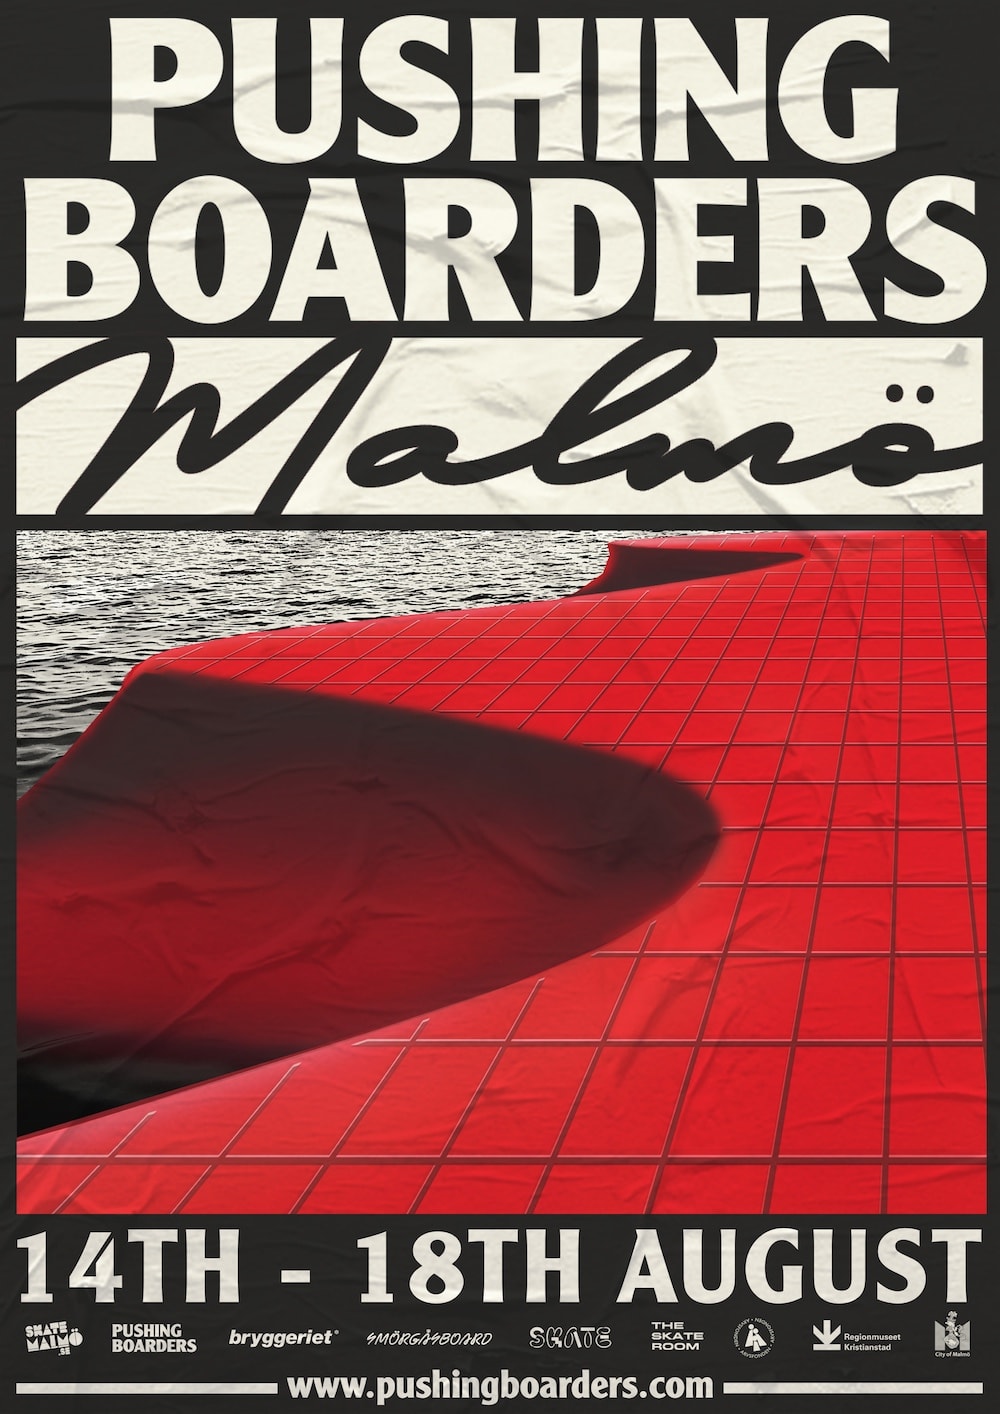 SKATEPAL'S 'PUSHING BOARDERS' EVENT COMING TO SWEDEN IN AUGUST